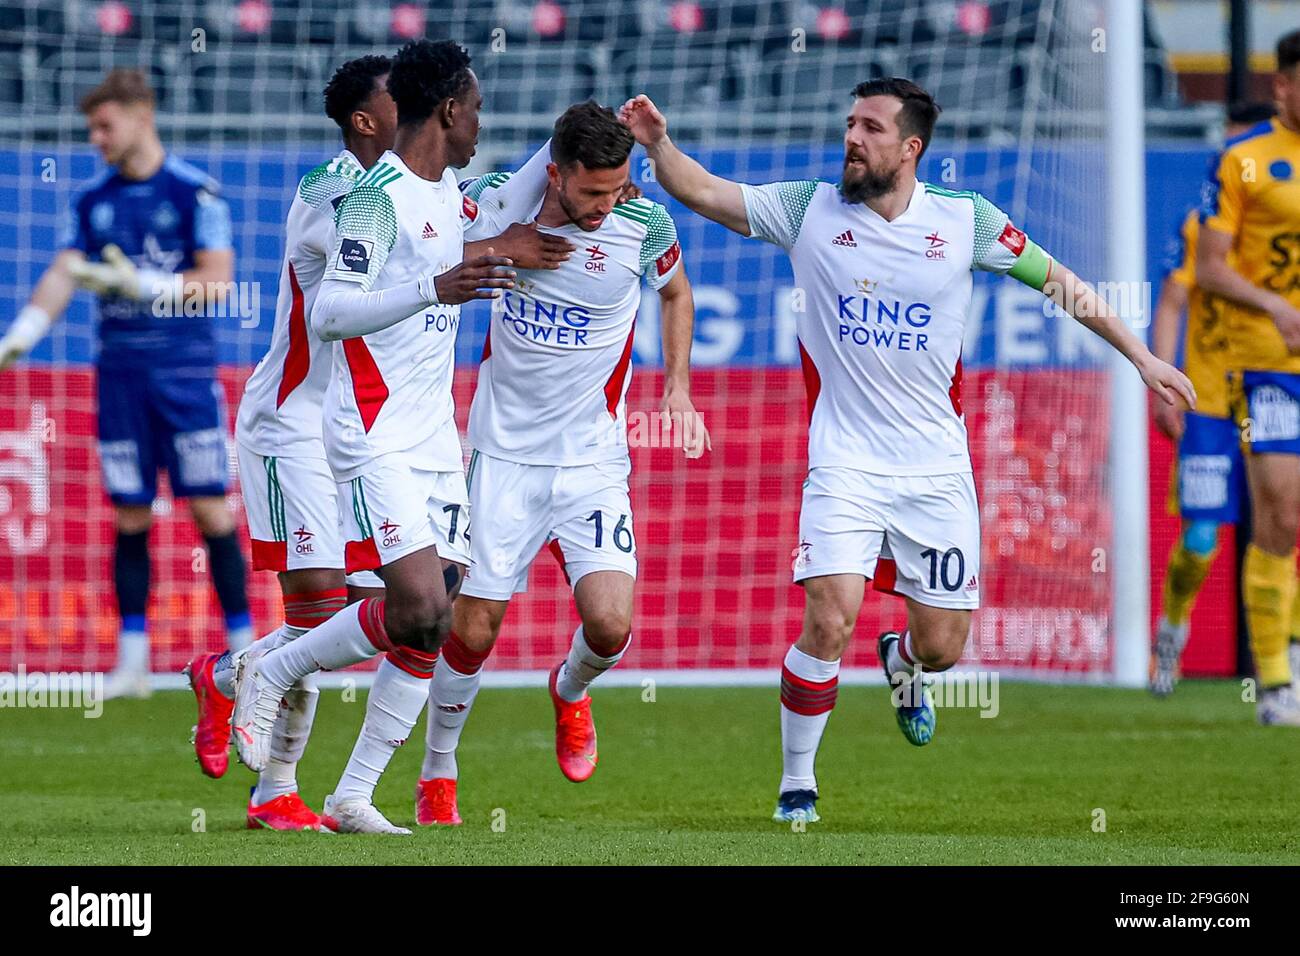 LEUVEN, BELGIUM - APRIL 18: Siebe Schrijvers of OH Leuven celebrating the first goal of his side, with (L) Kamal Sowah of OH Leuven, Xavier Mercier of OH Leuven during the Jupiler Pro League match between OH Leuven and Waasland Beveren at King Power at Den Dreef Stadion on April 18, 2021 in Leuven, Belgium (Photo by Perry van de Leuvert/Orange Pictures) Stock Photo